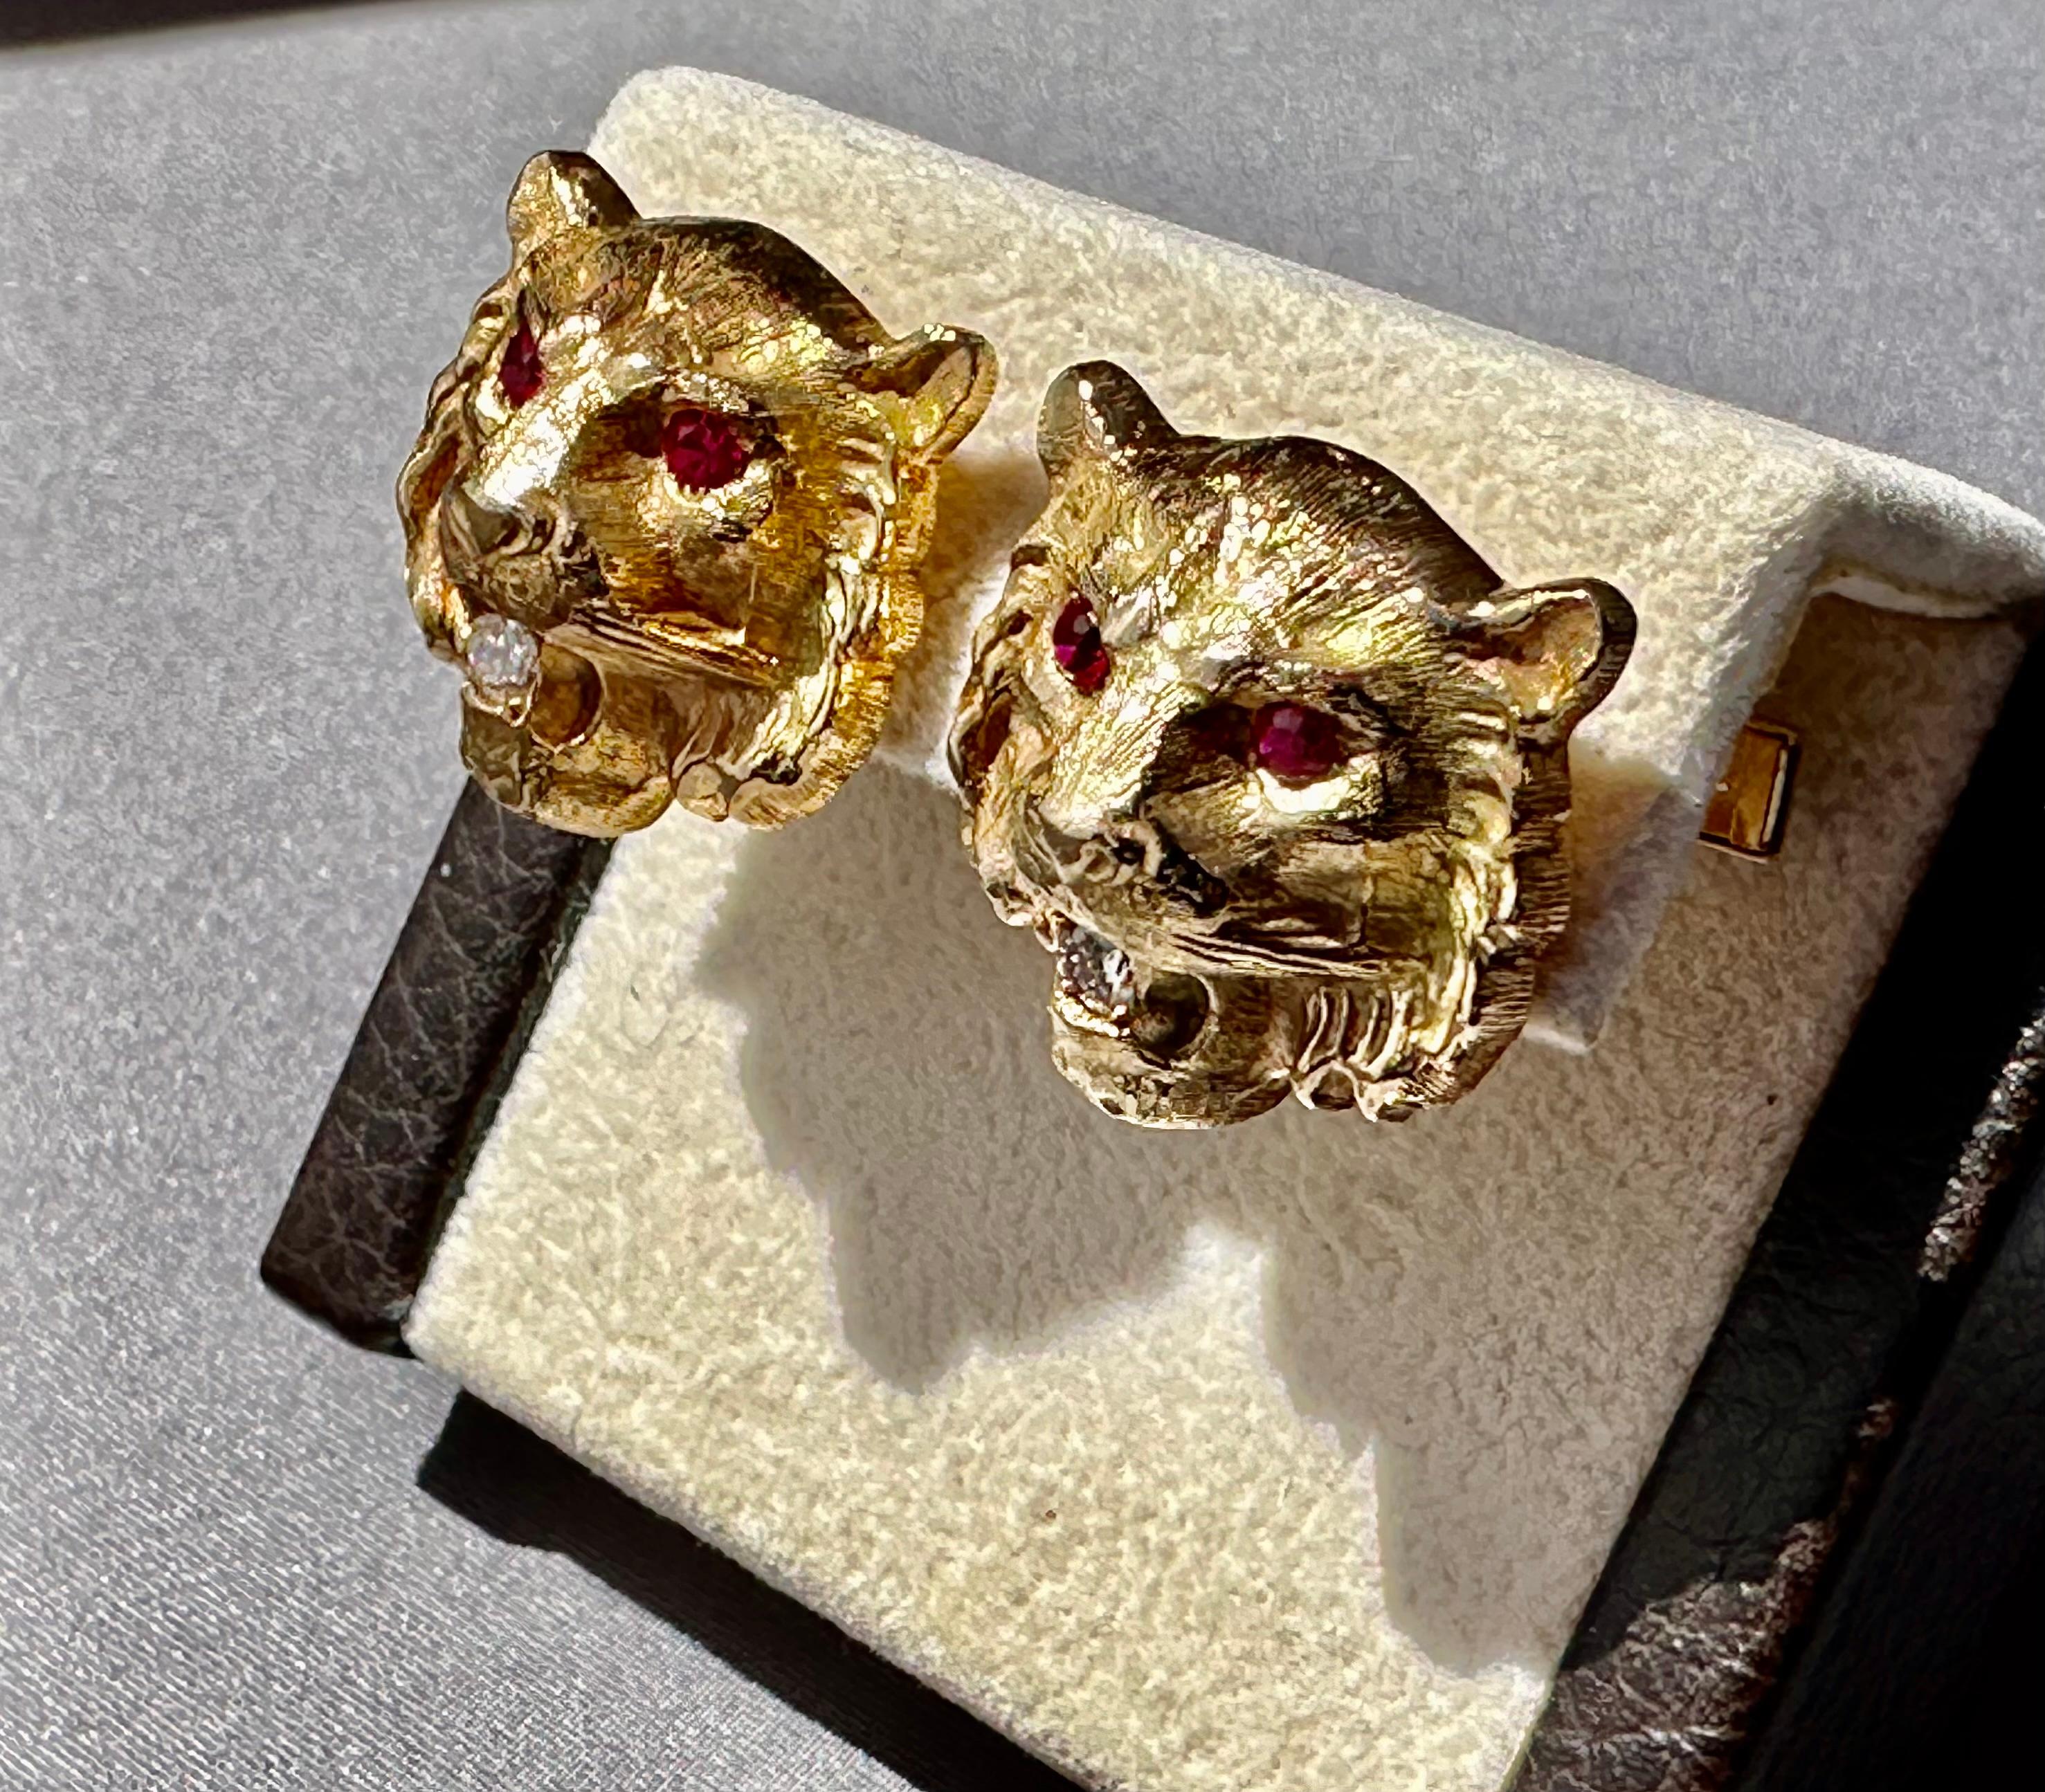 Men's Custom Made Ruby Diamond & 14k Gold Lion / Tiger Cufflinks

Description / Condition: New.  All jewelry has been professionally scrutinized and cleaned prior to being offered for sale. 

Manufacturer: Custom made by 